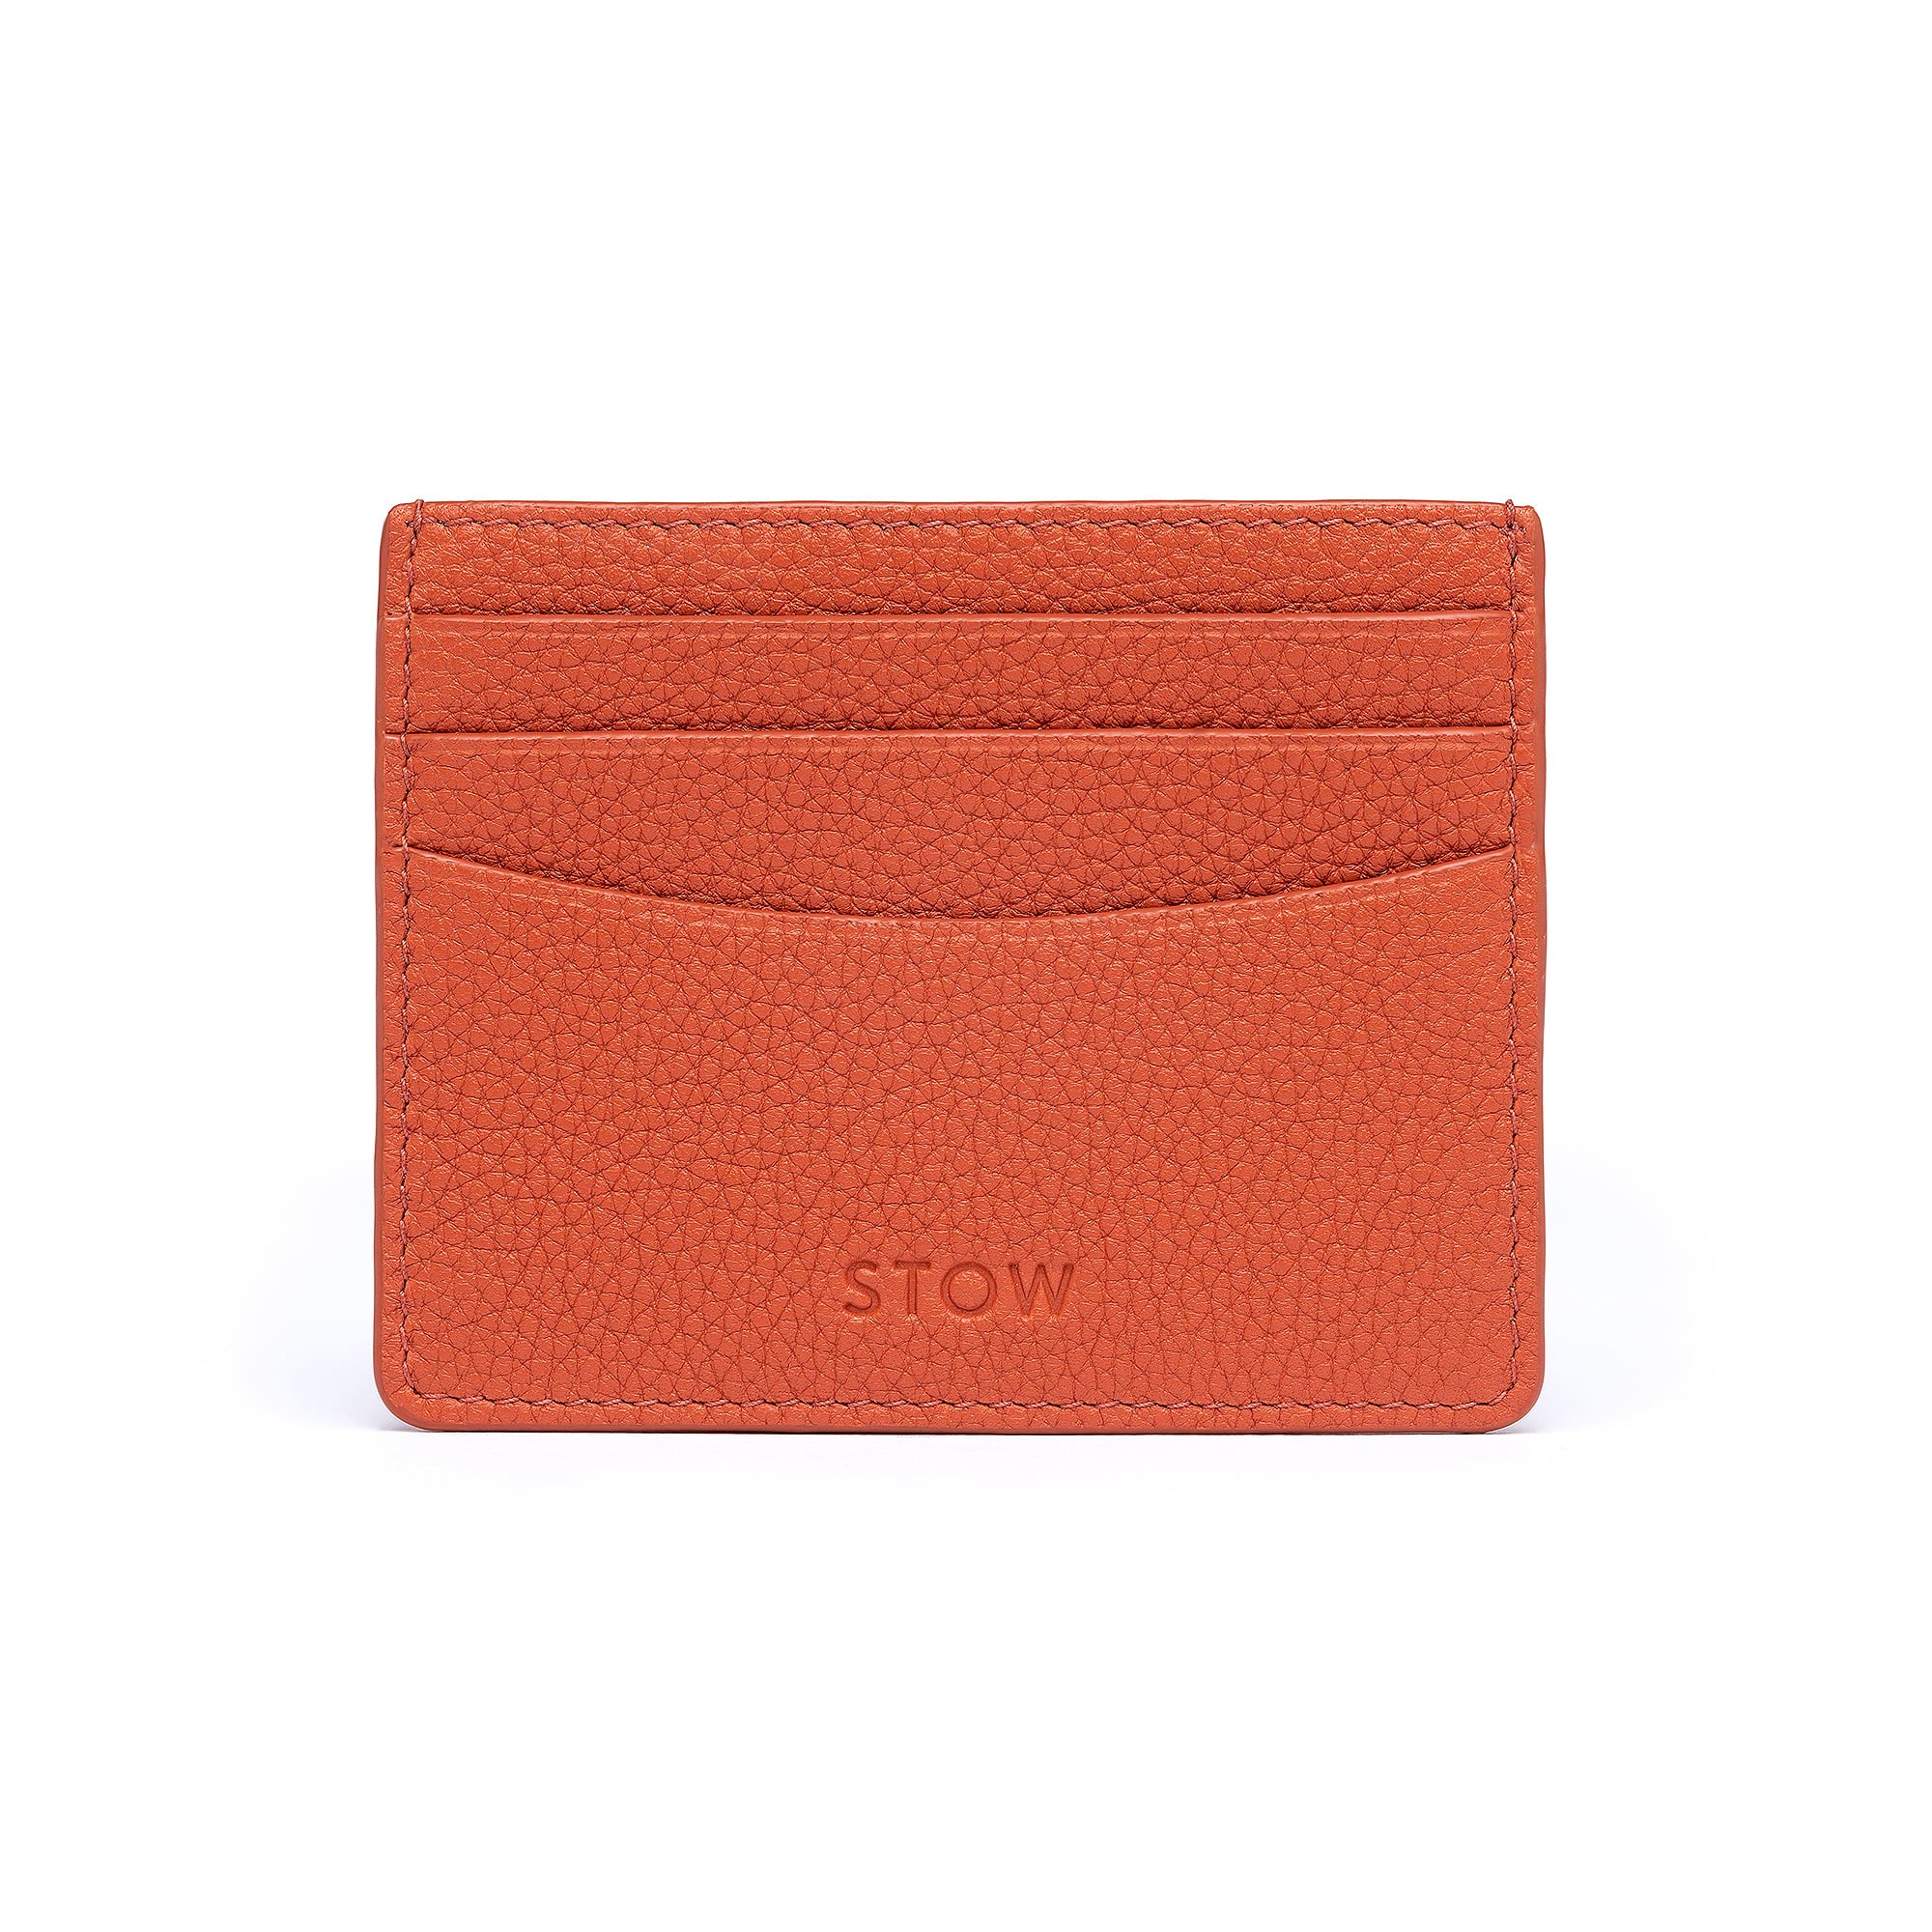 STOW Leather Cardholder in Clay Orange colour.